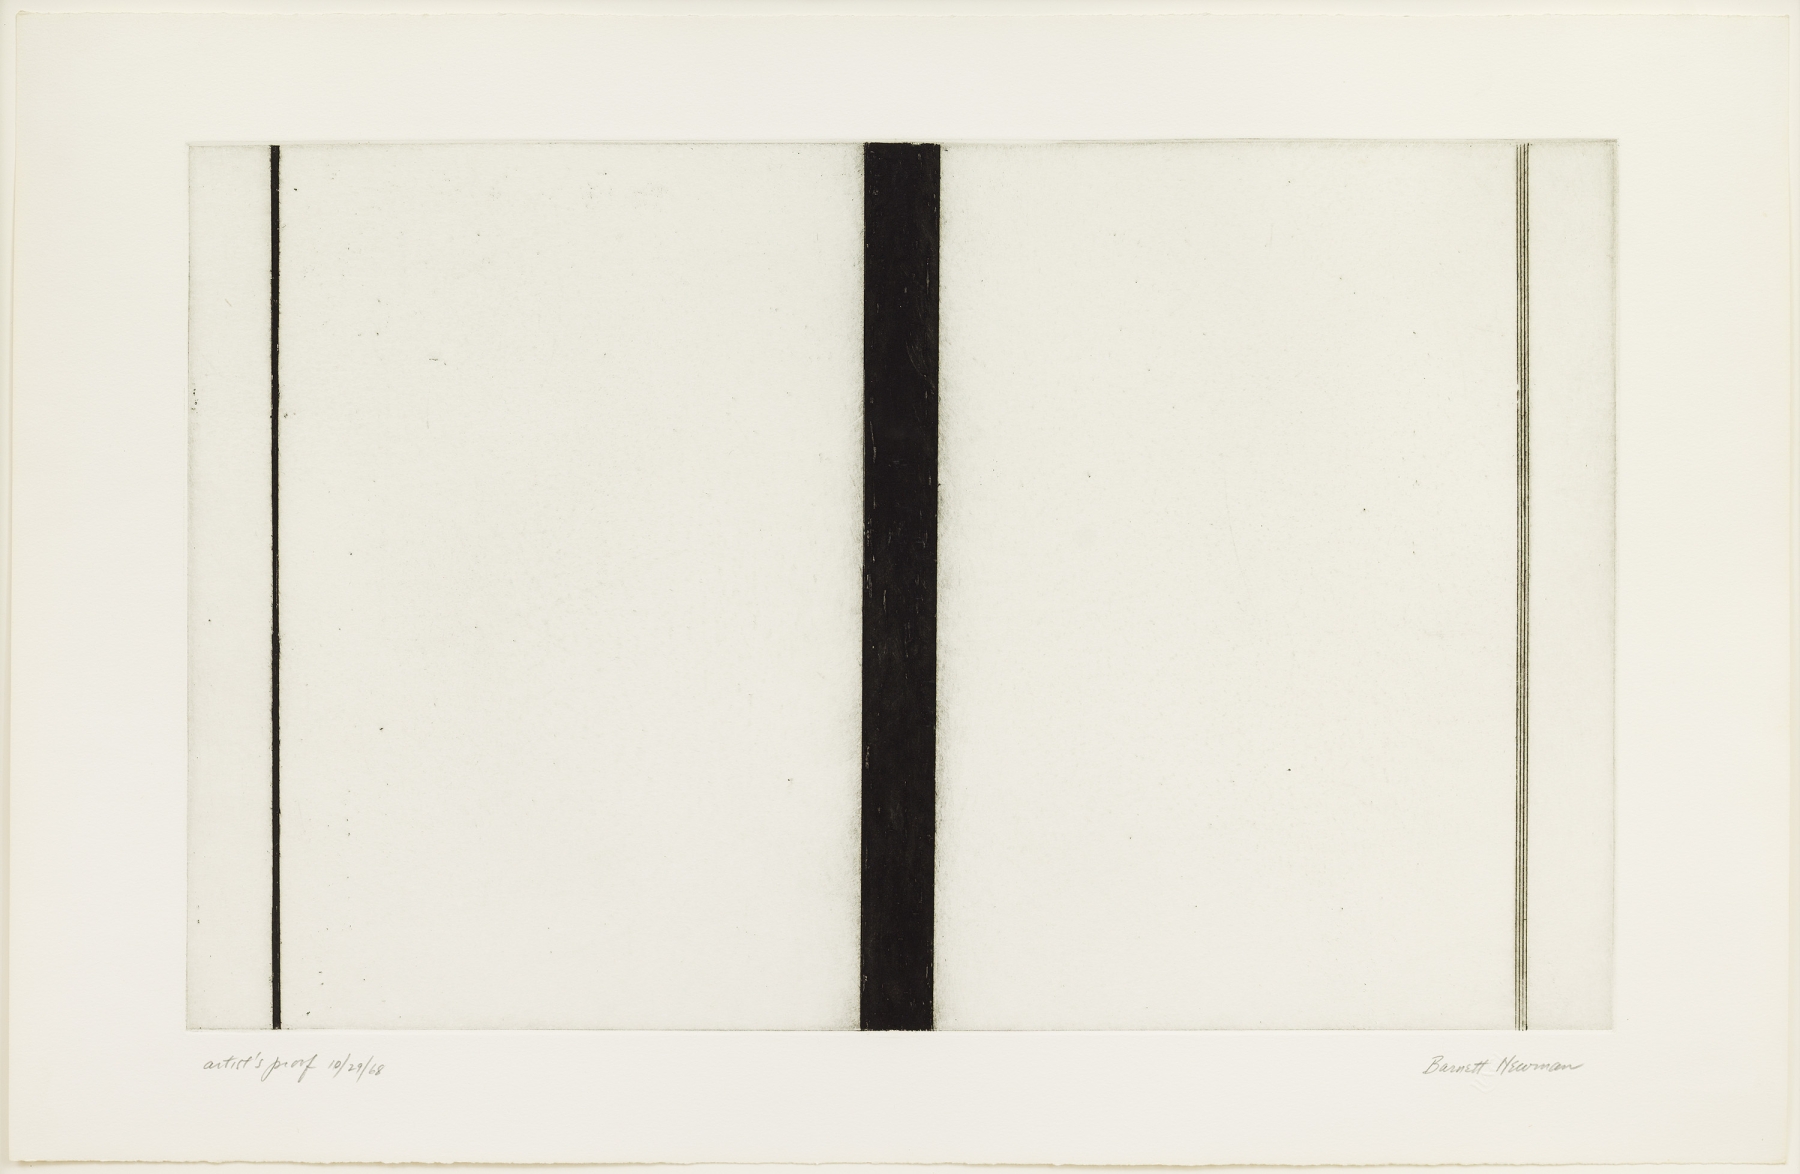 Barnett Newman,&nbsp;Untitled Etching #1, 1969. Etching and aquatint,

14 15/16 x 23 7/7 inches, plate; 19 3/16 x 29 3/4 inches, sheet.

Private Collection.